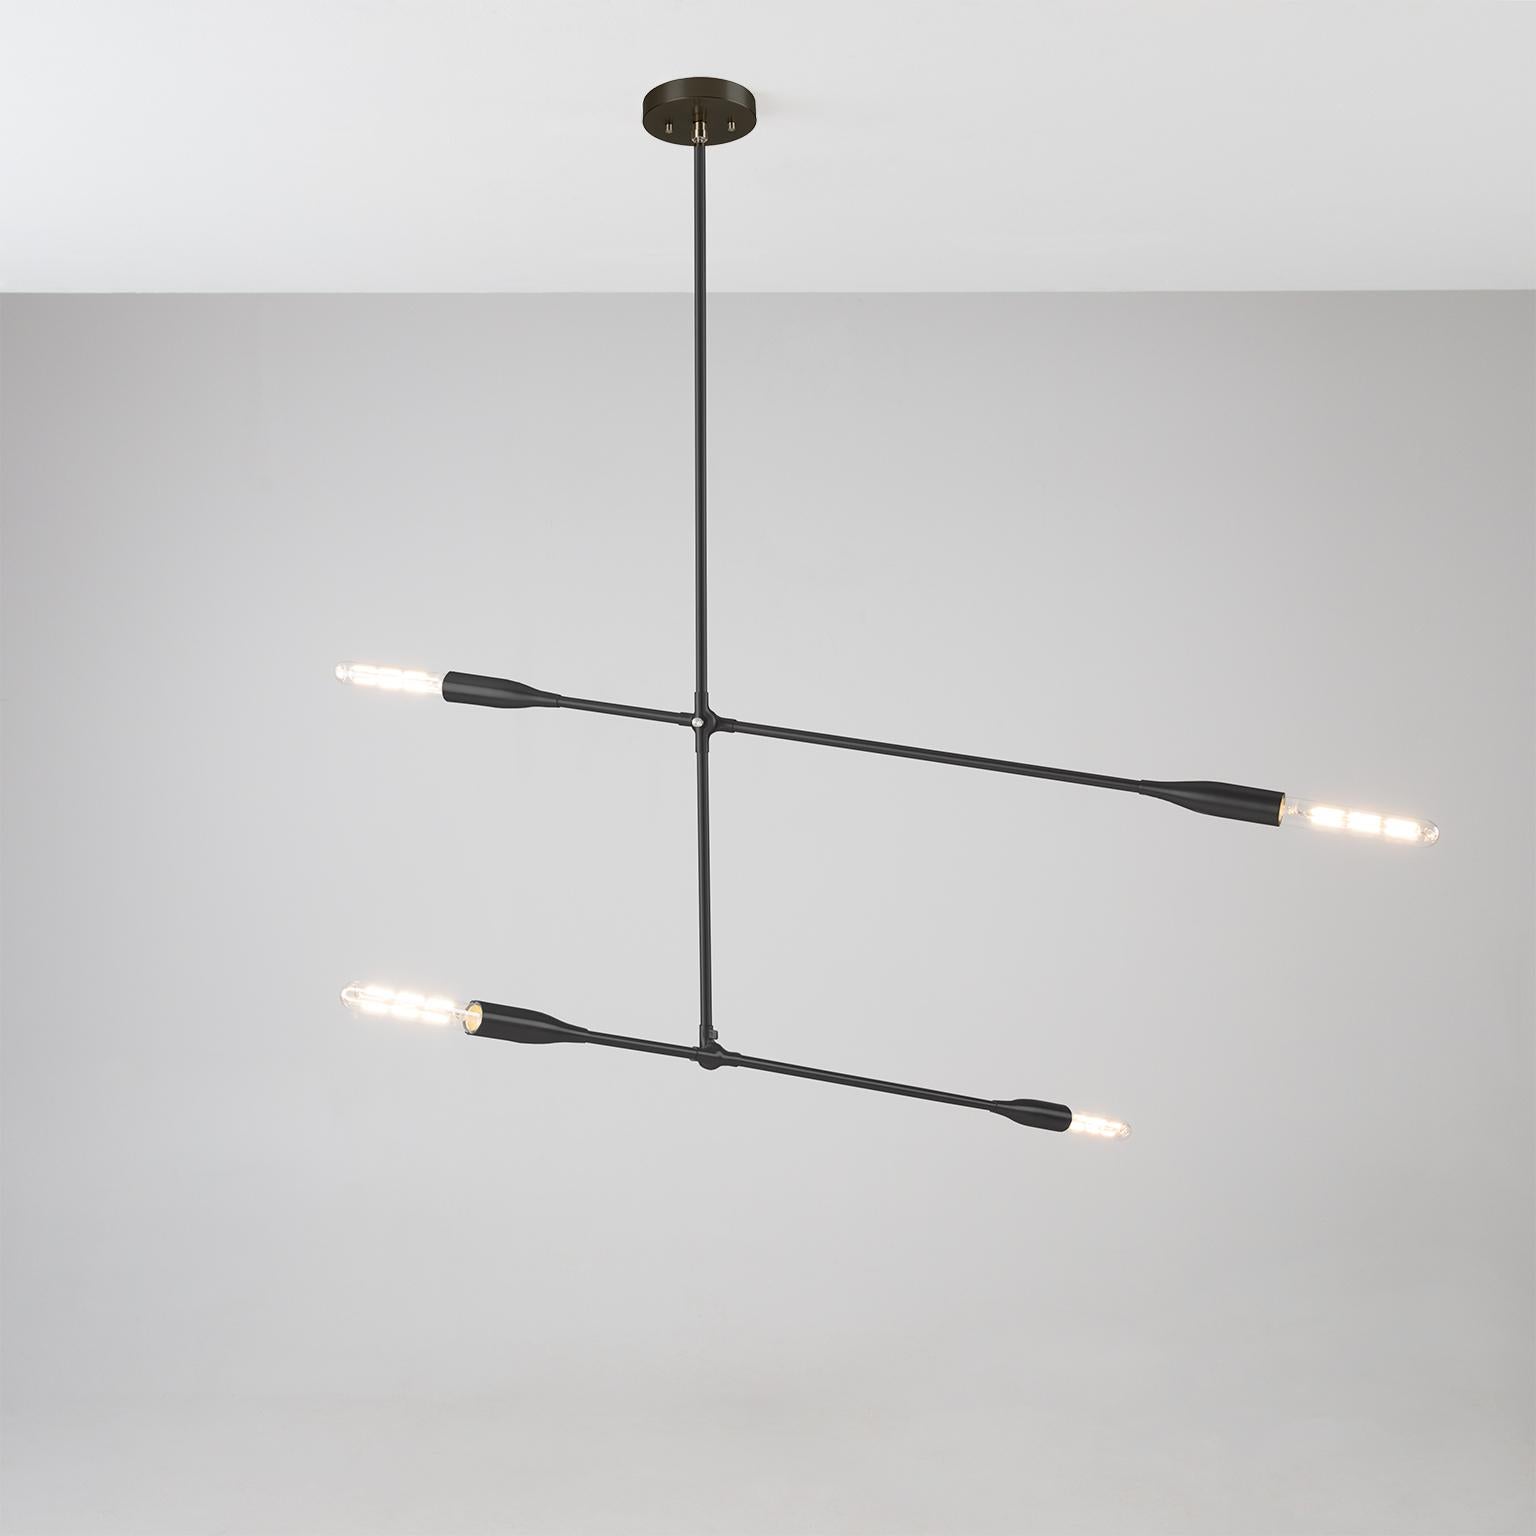 Sorenthia Two-Arm Light, Custom-Made Contemporary Pendant by Studio Dunn In New Condition For Sale In Rumford, RI